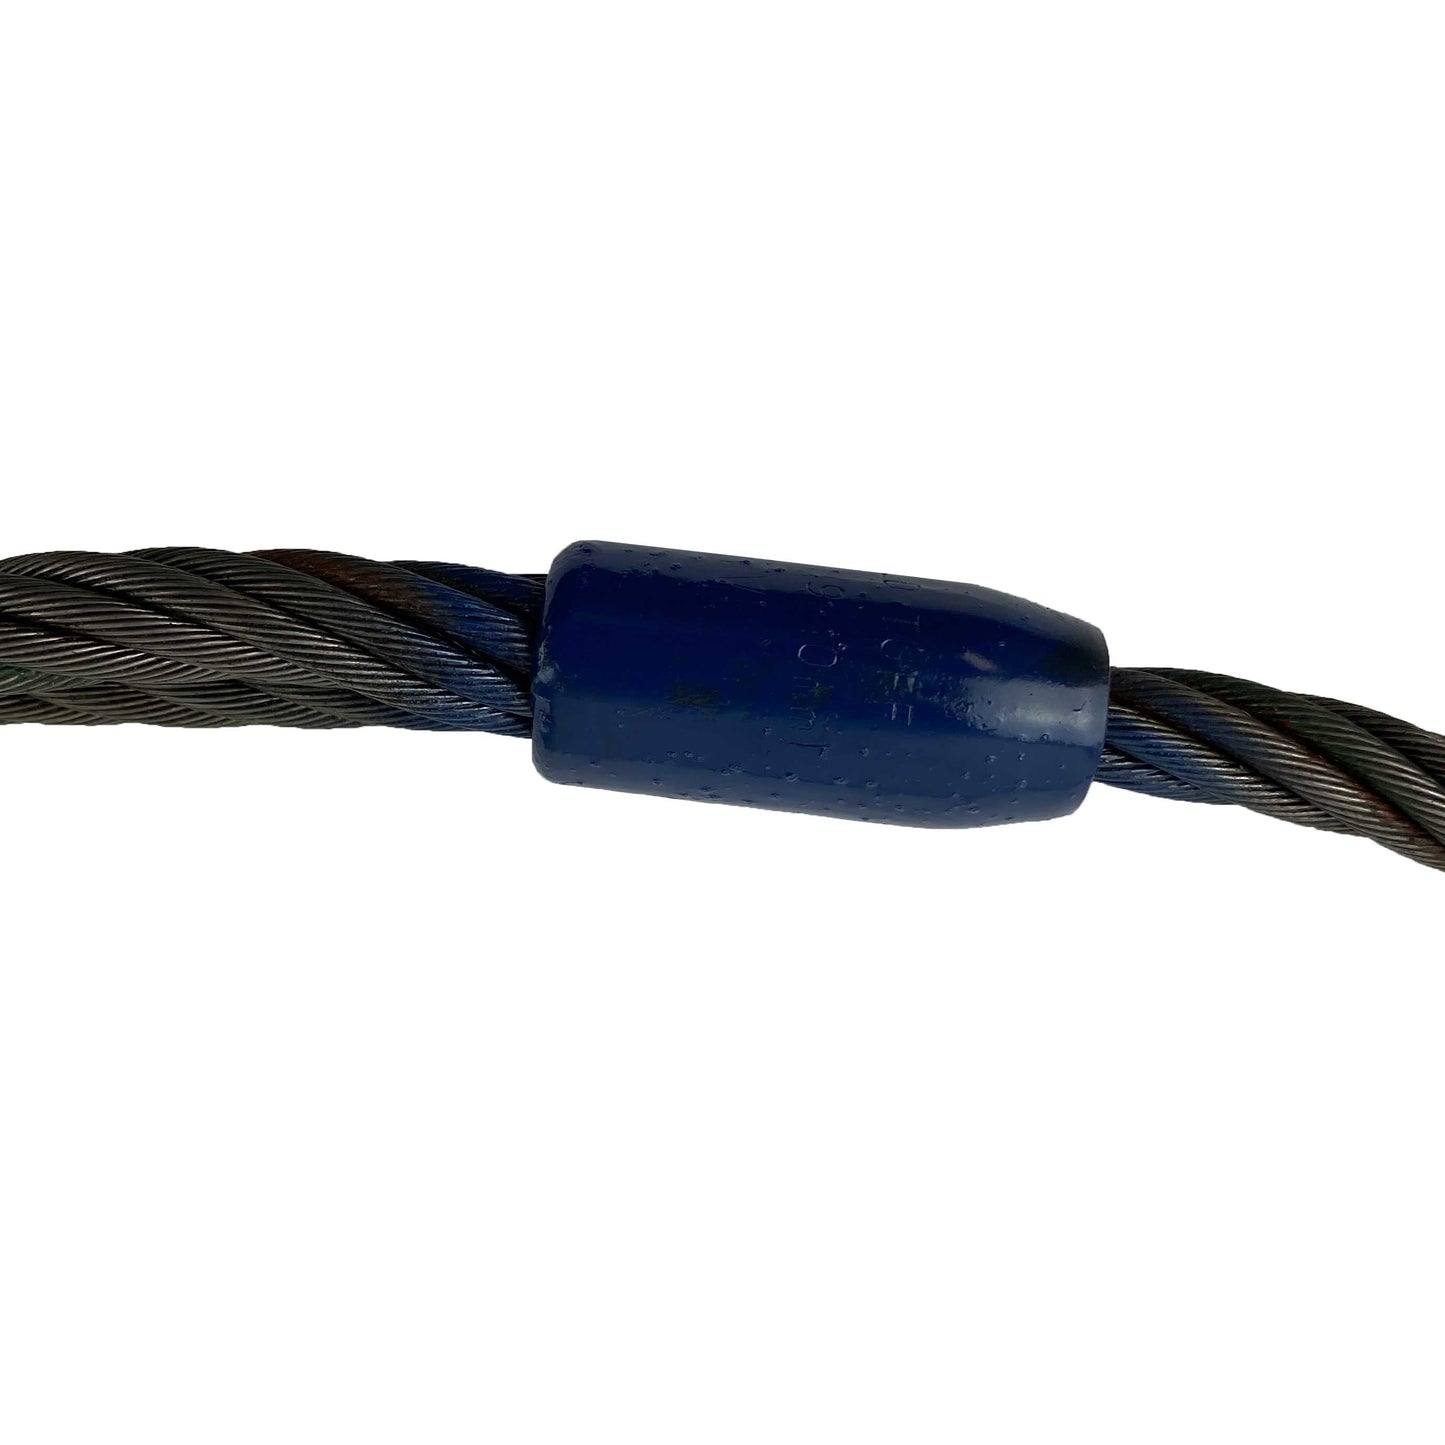 138 inch x 14 foot Mechanical Splice Grommet Wire Rope Sling image 4 of 4